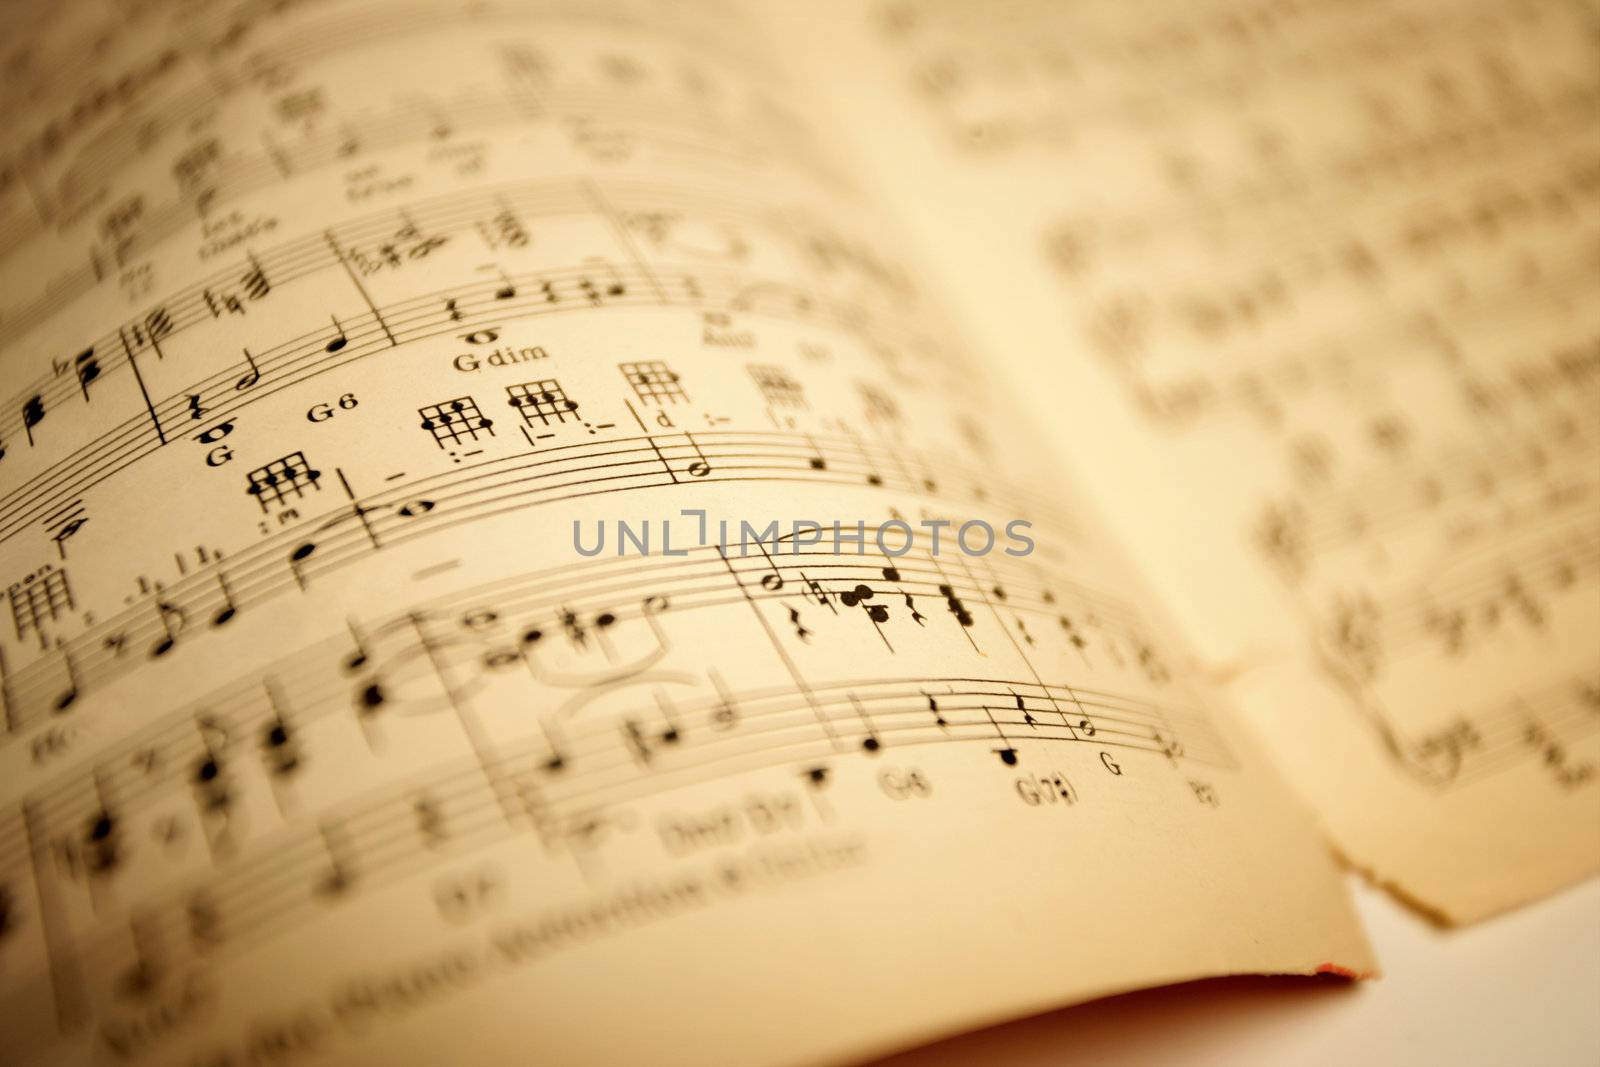 Old sheet music. Shallow depth-of-field.
